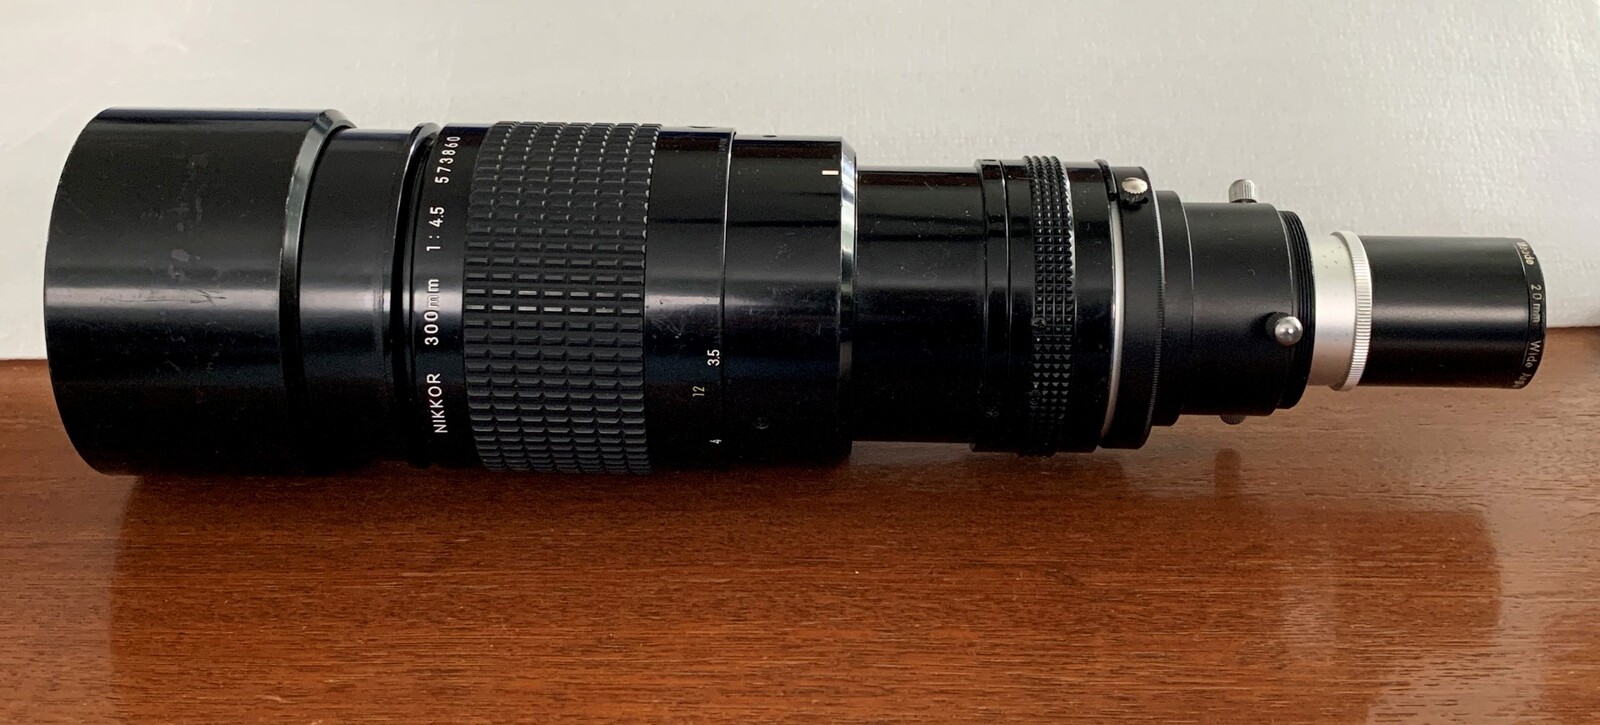 Nikon Lens F To EP New On 300mm F4p5